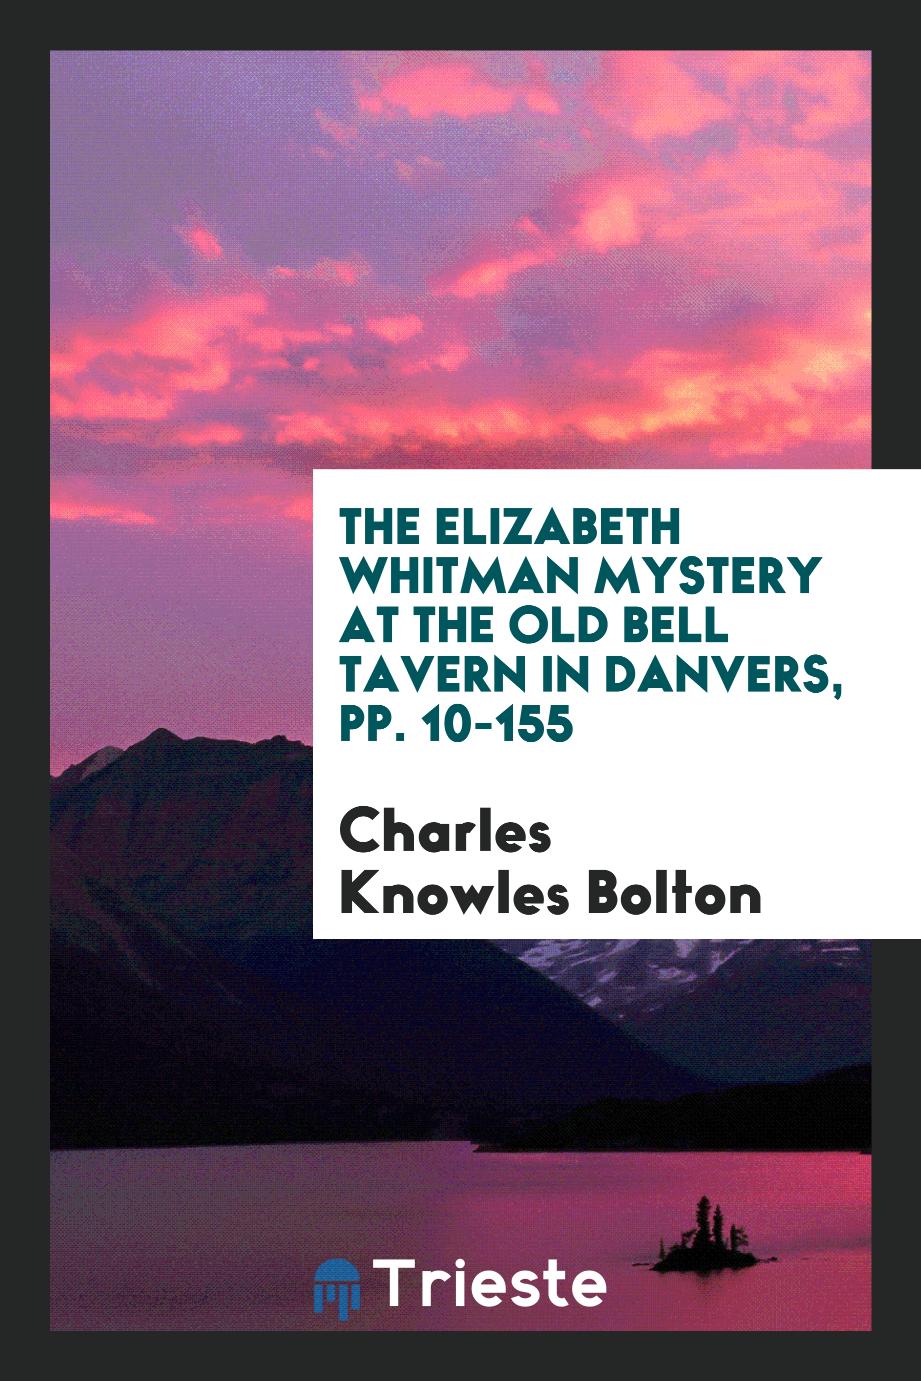 The Elizabeth Whitman Mystery at the Old Bell Tavern in Danvers, pp. 10-155